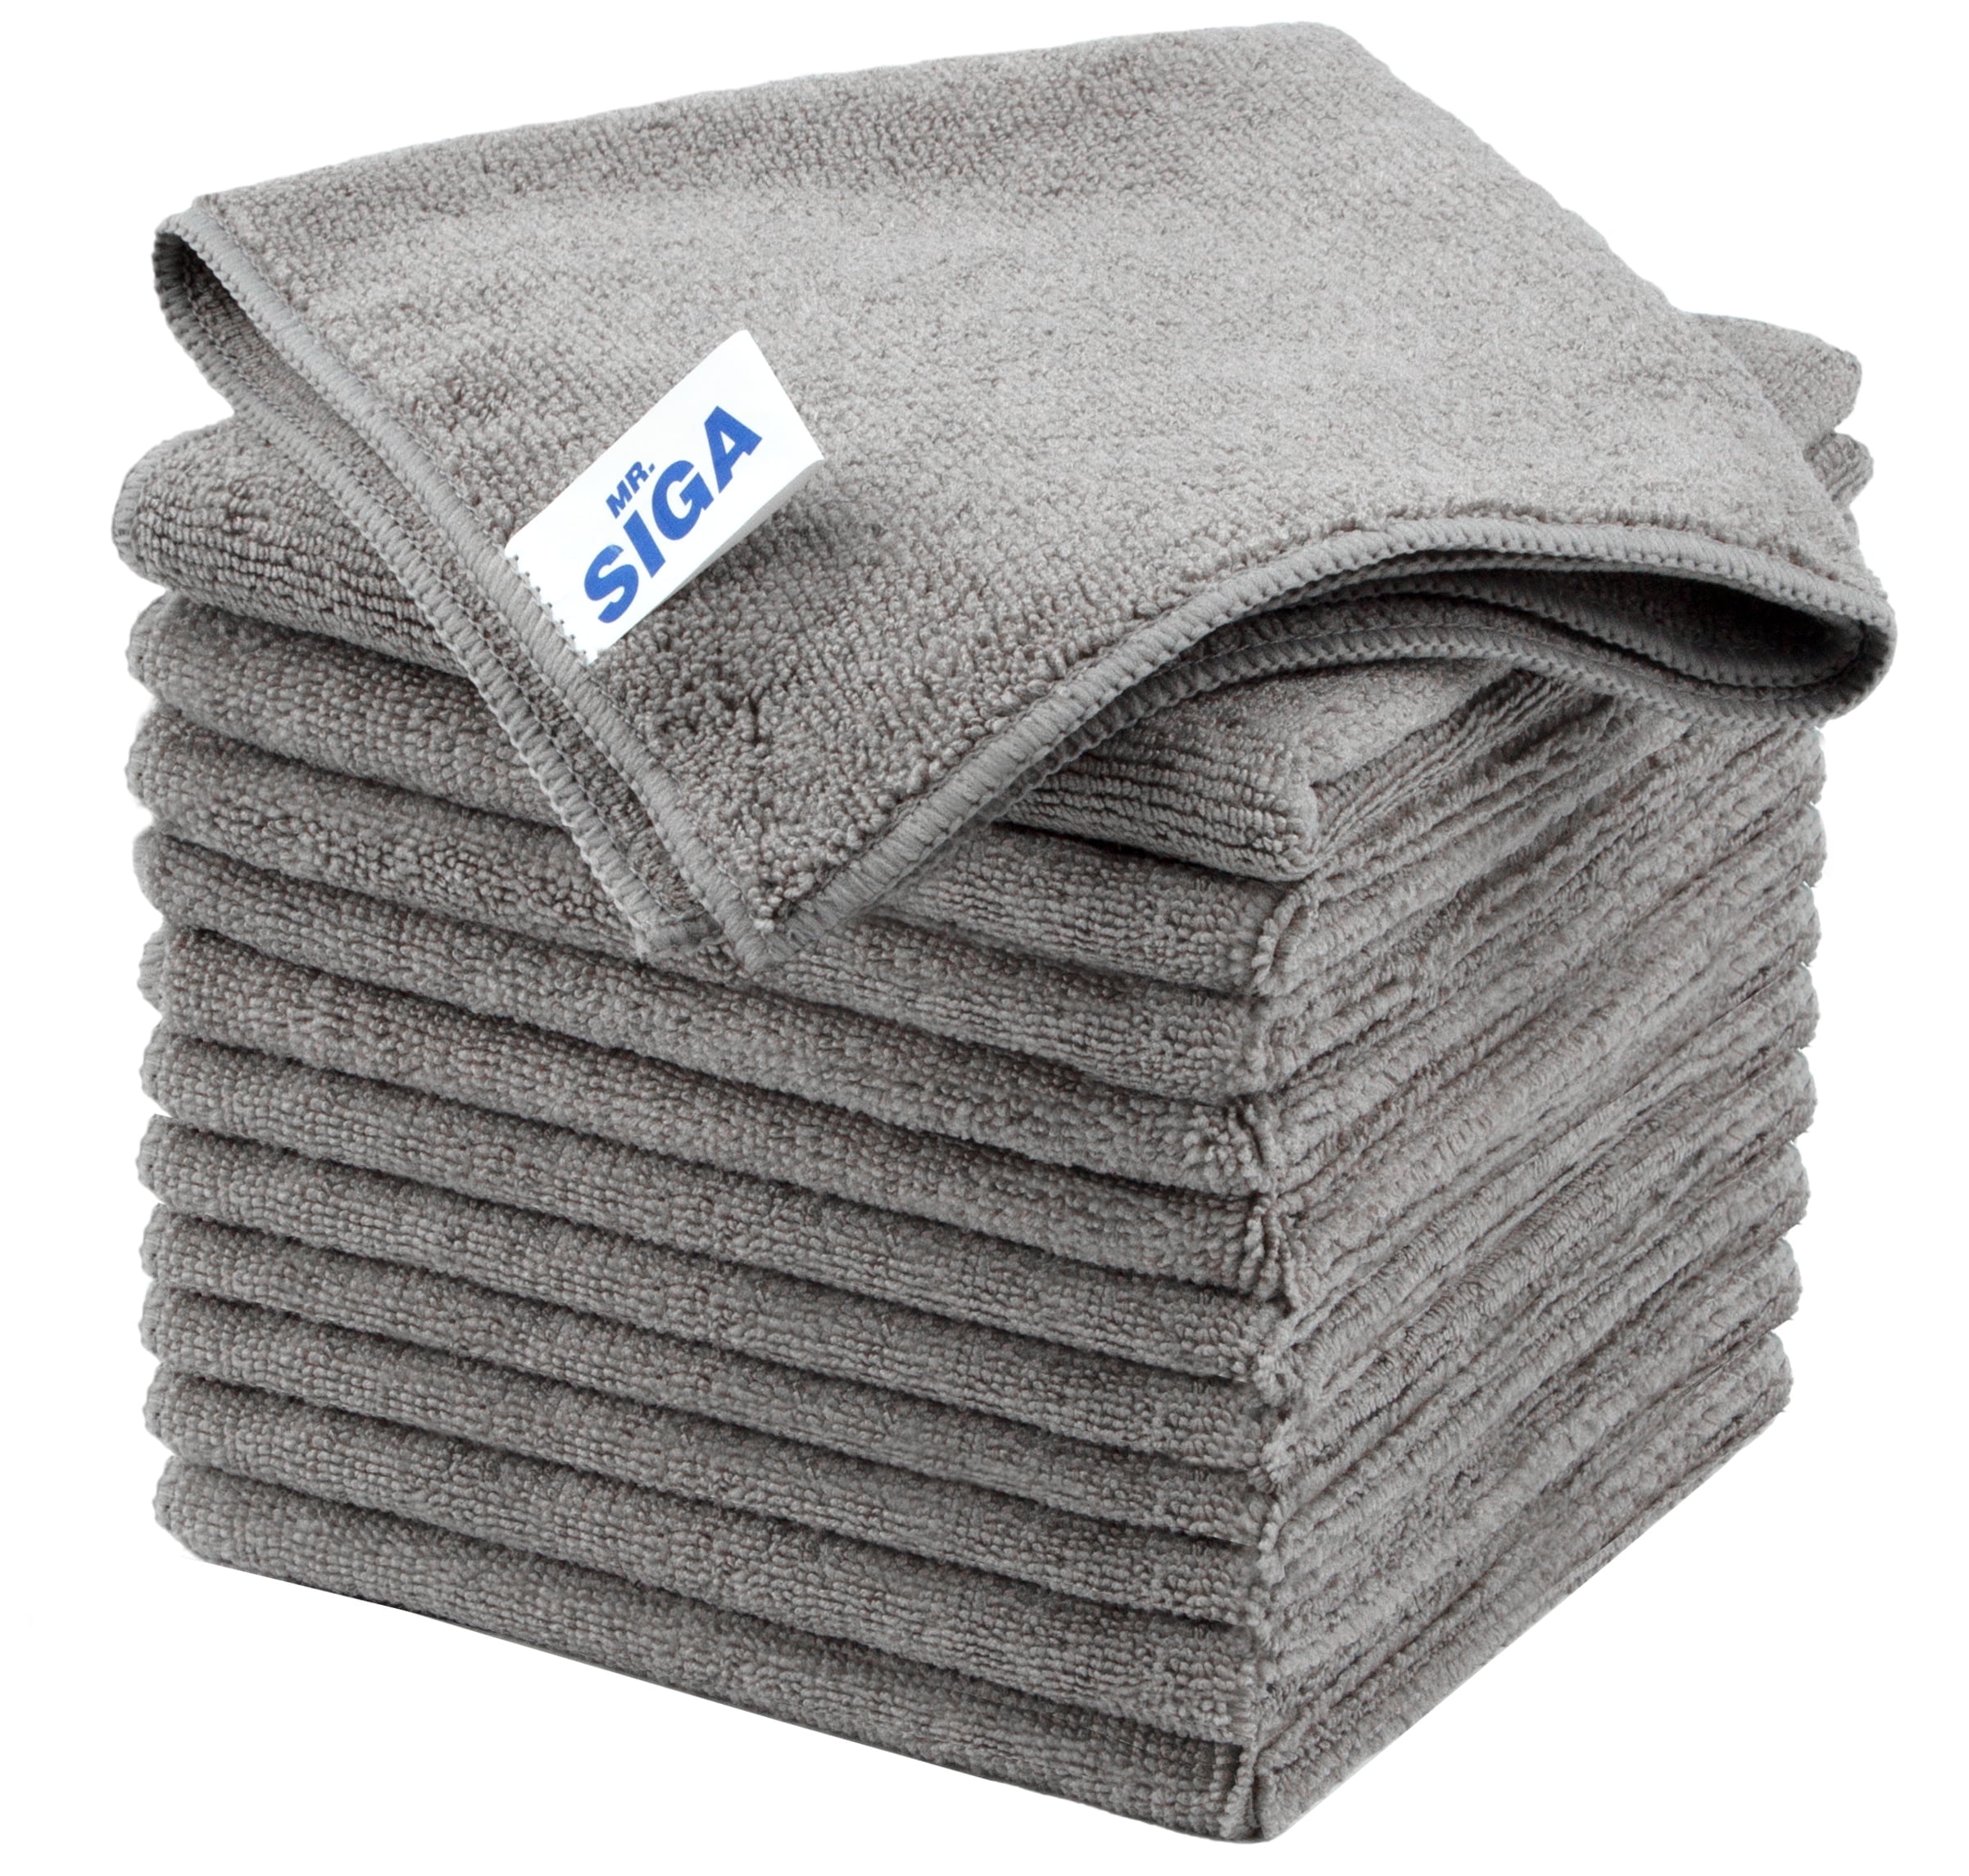 MR.Siga Microfiber Cleaning Cloth, All-Purpose Household Microfiber Towels, Streak Free Cleaning Rags, Pack of 12, Grey